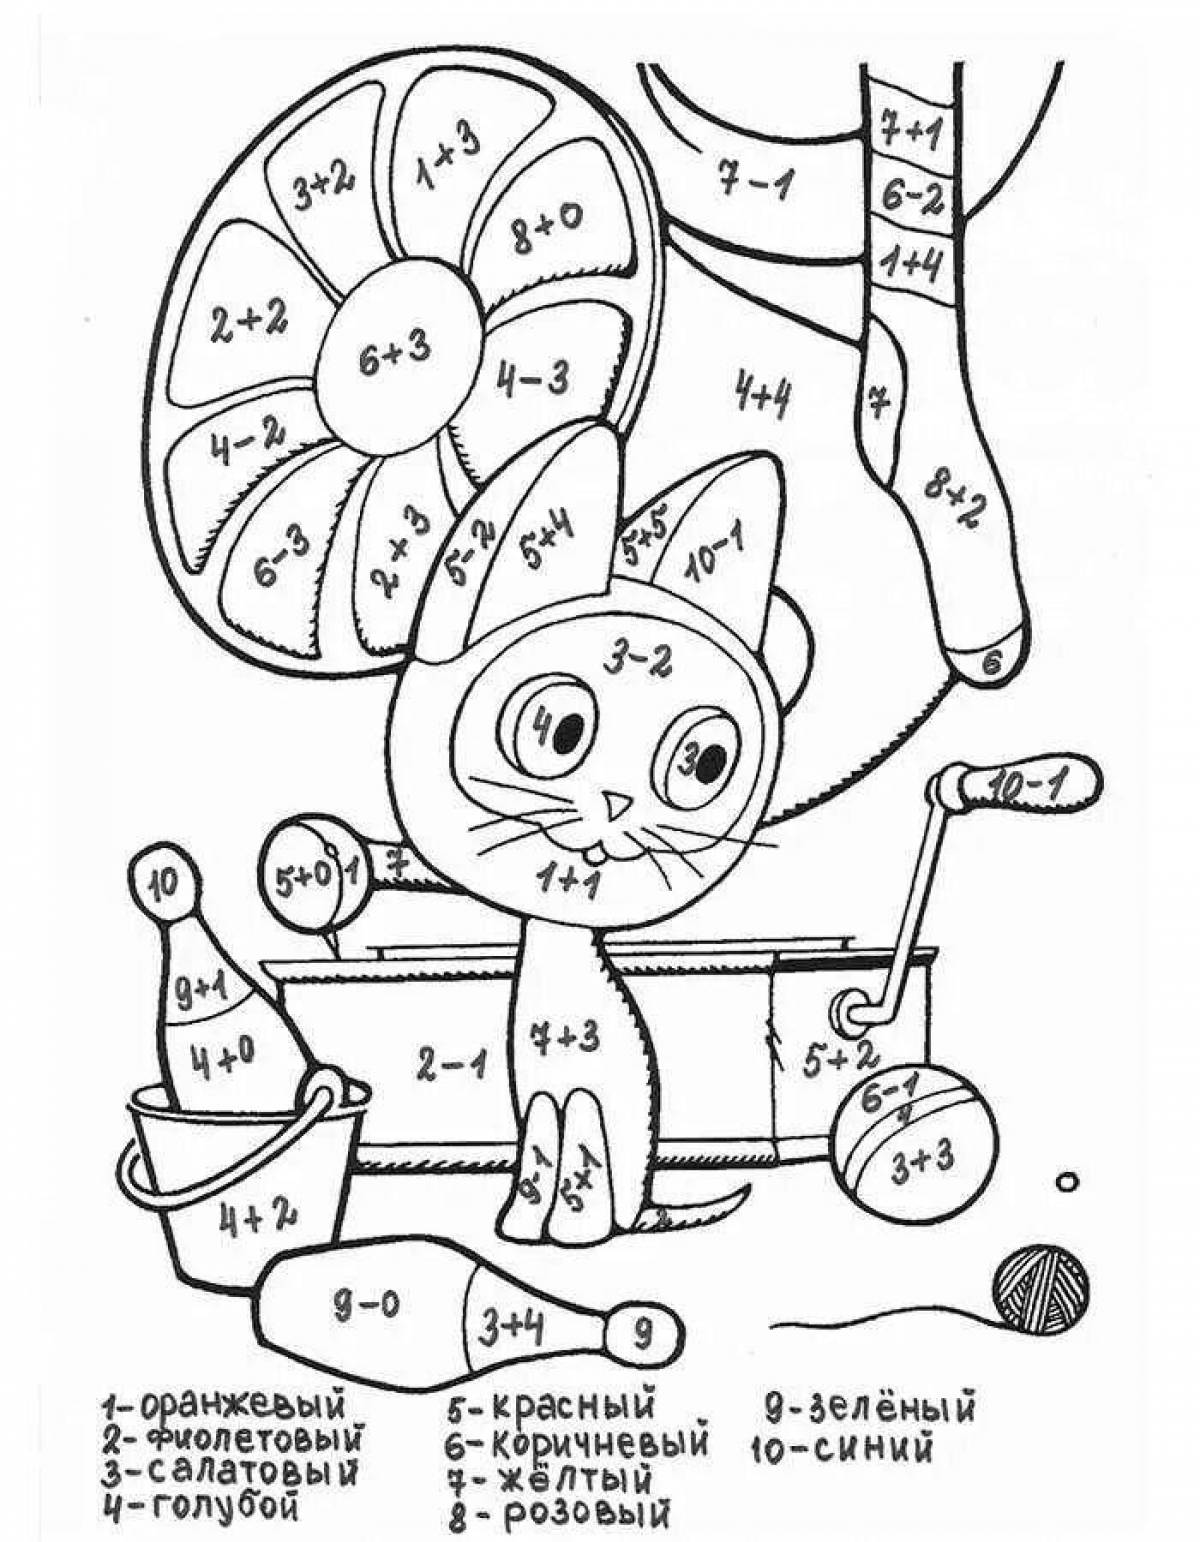 Entertaining subtraction coloring for grade 1